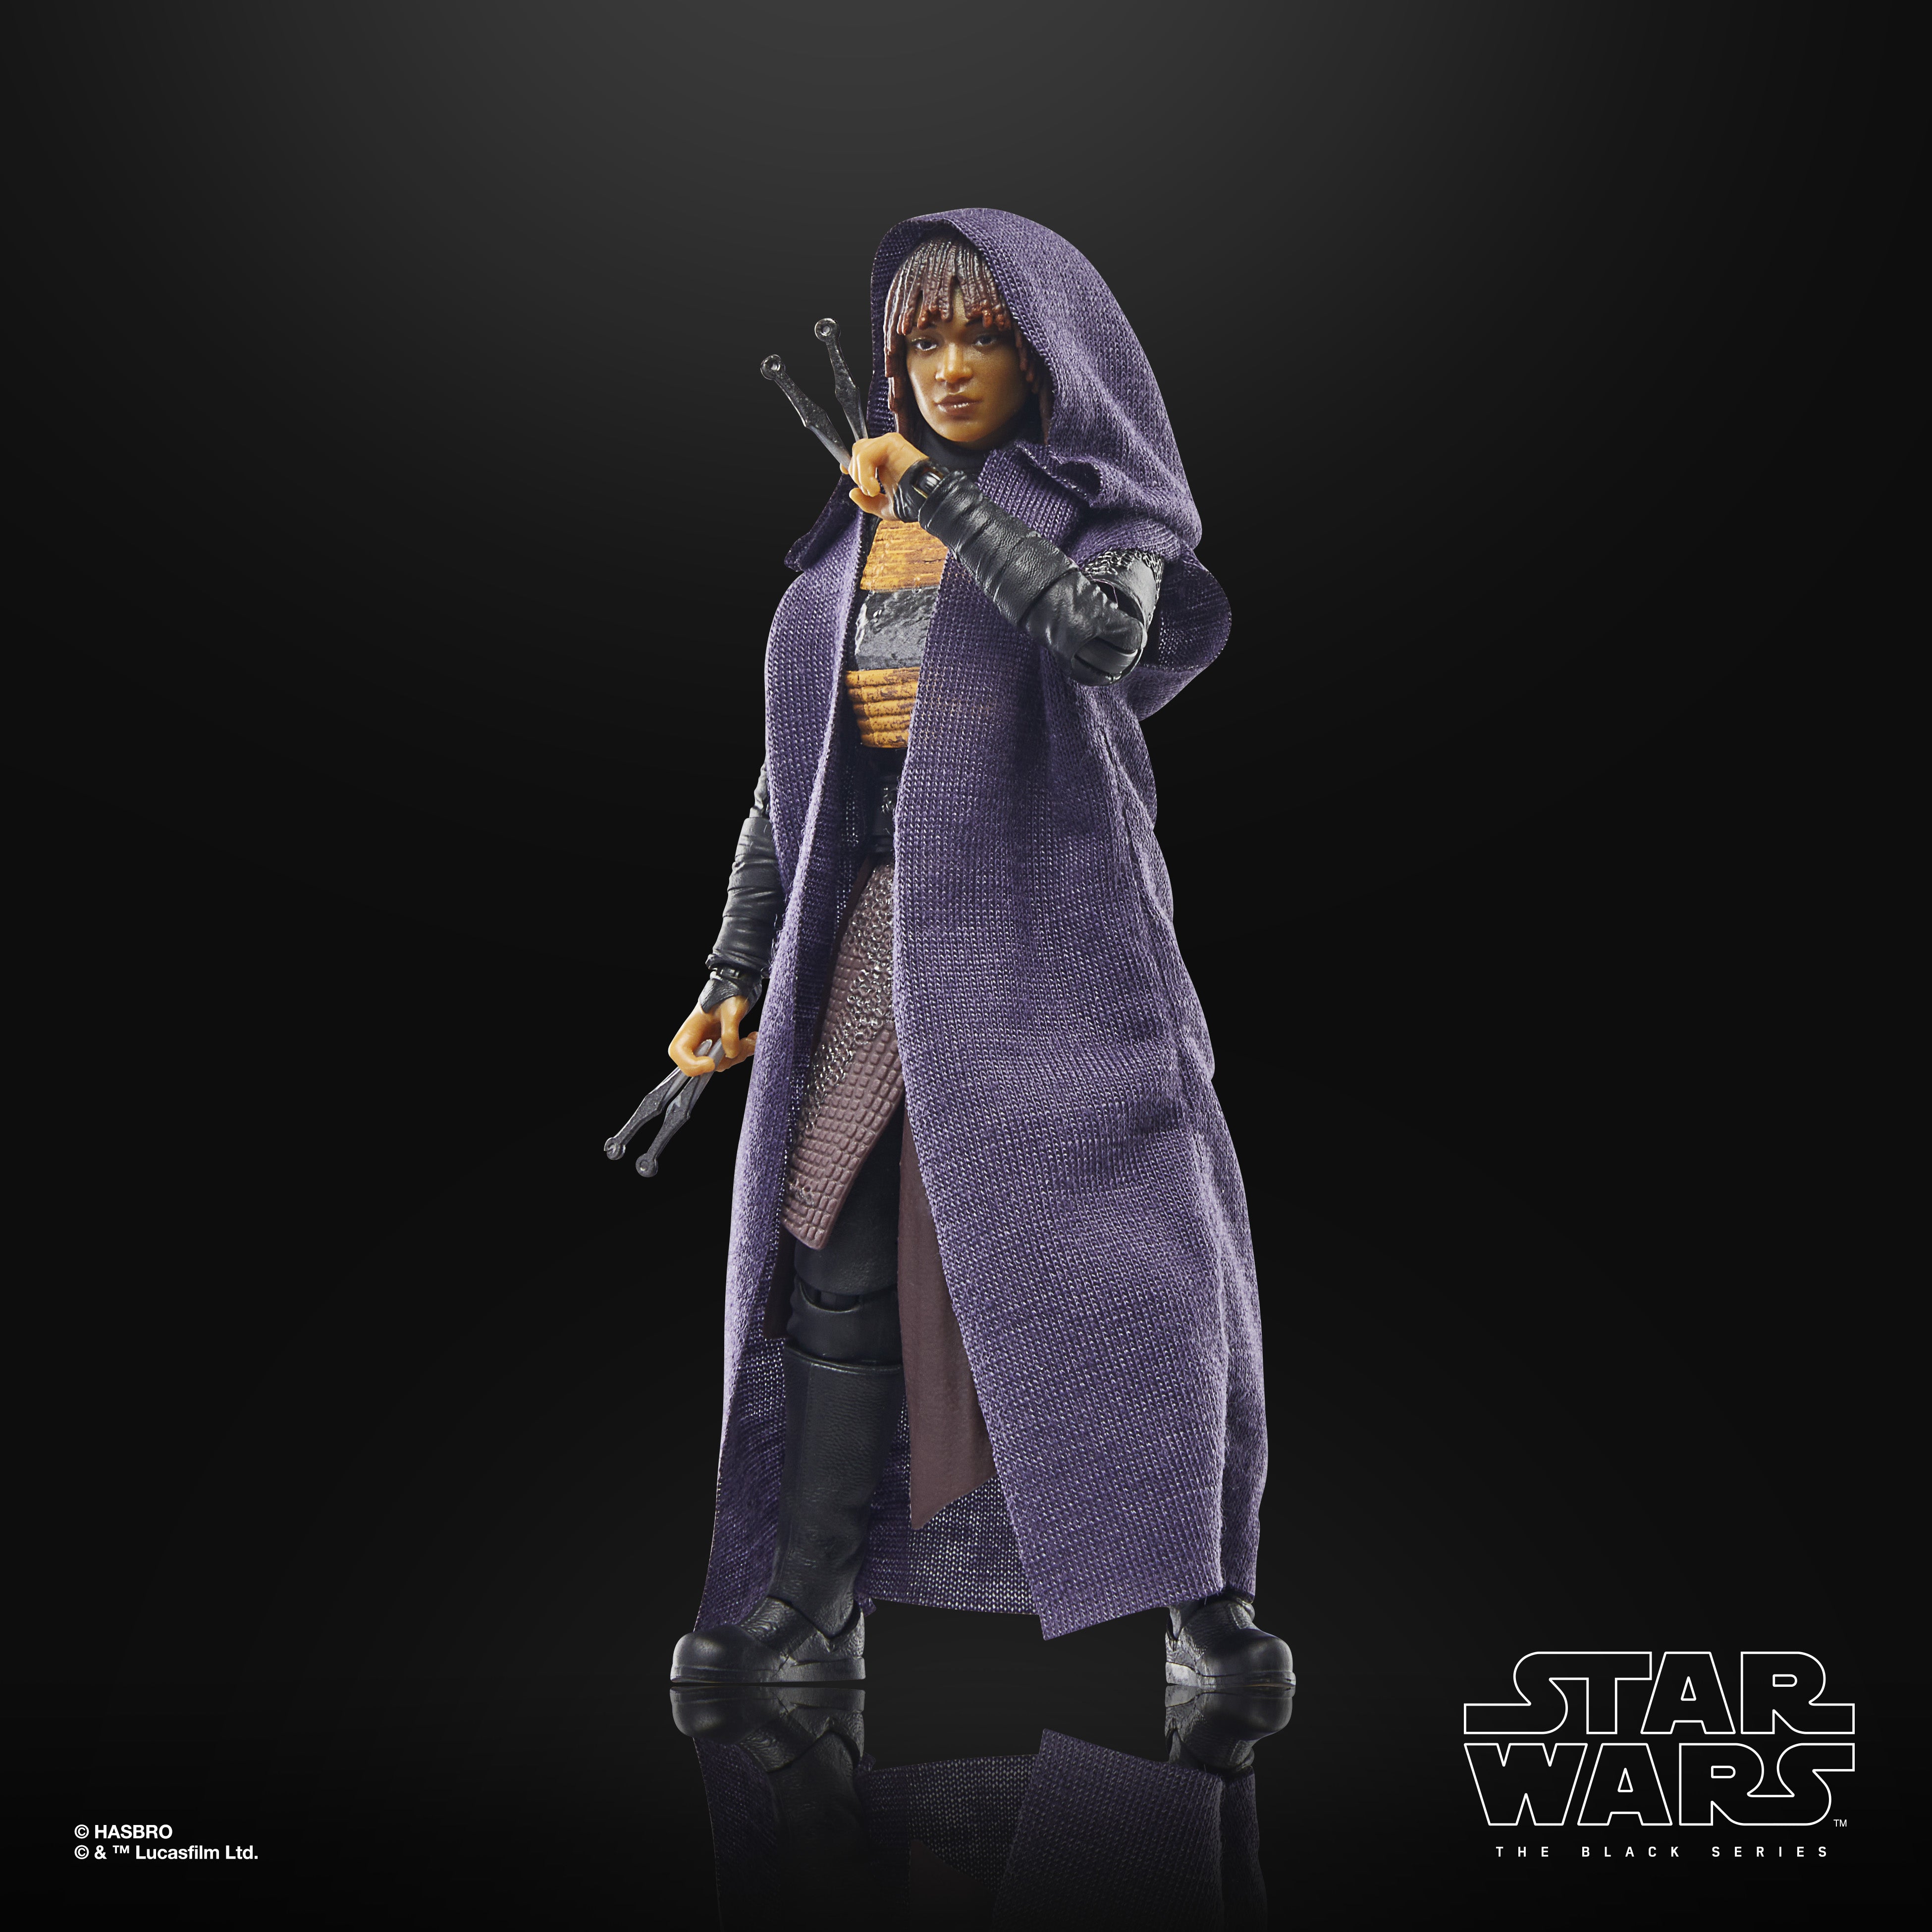 Star Wars The Black Series: The Acolyte - Mae Assassin